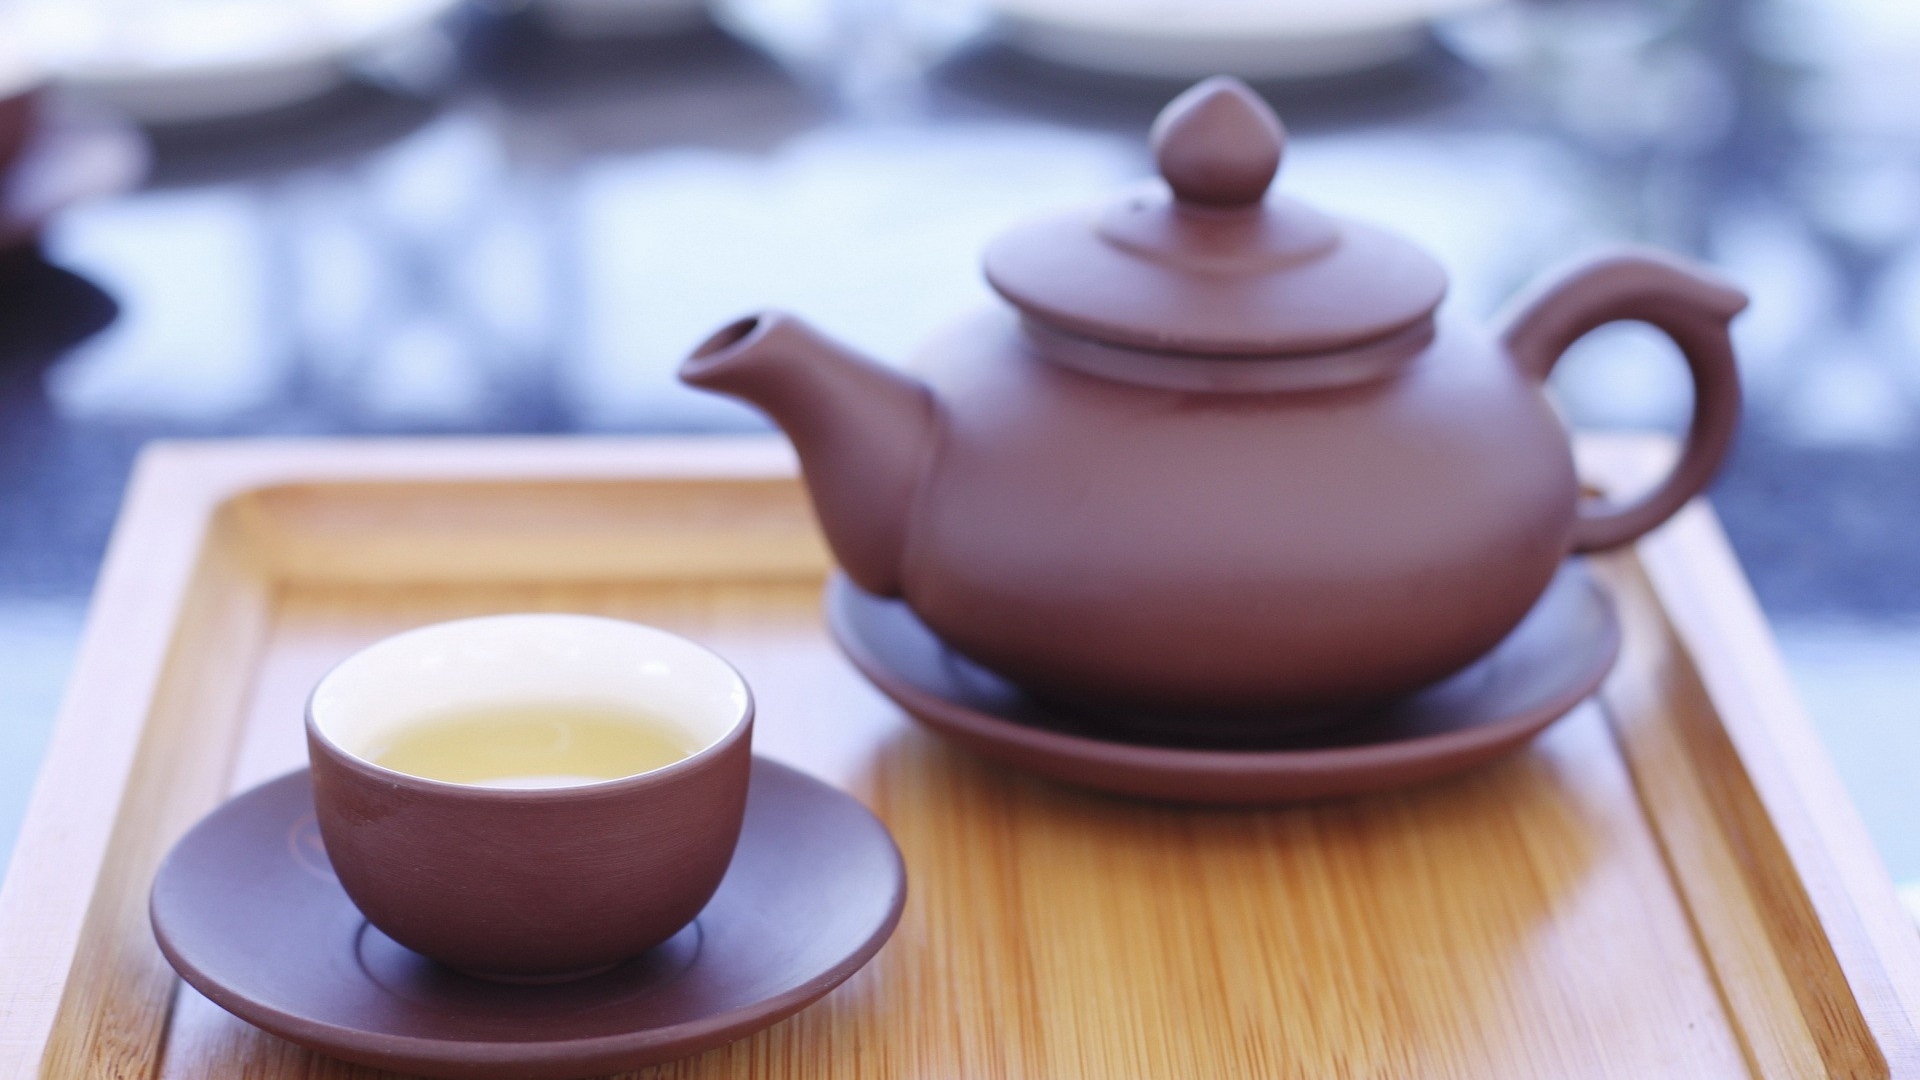 Teapot Cup Dishes Drink Wallpaper Background Full HD 1080p